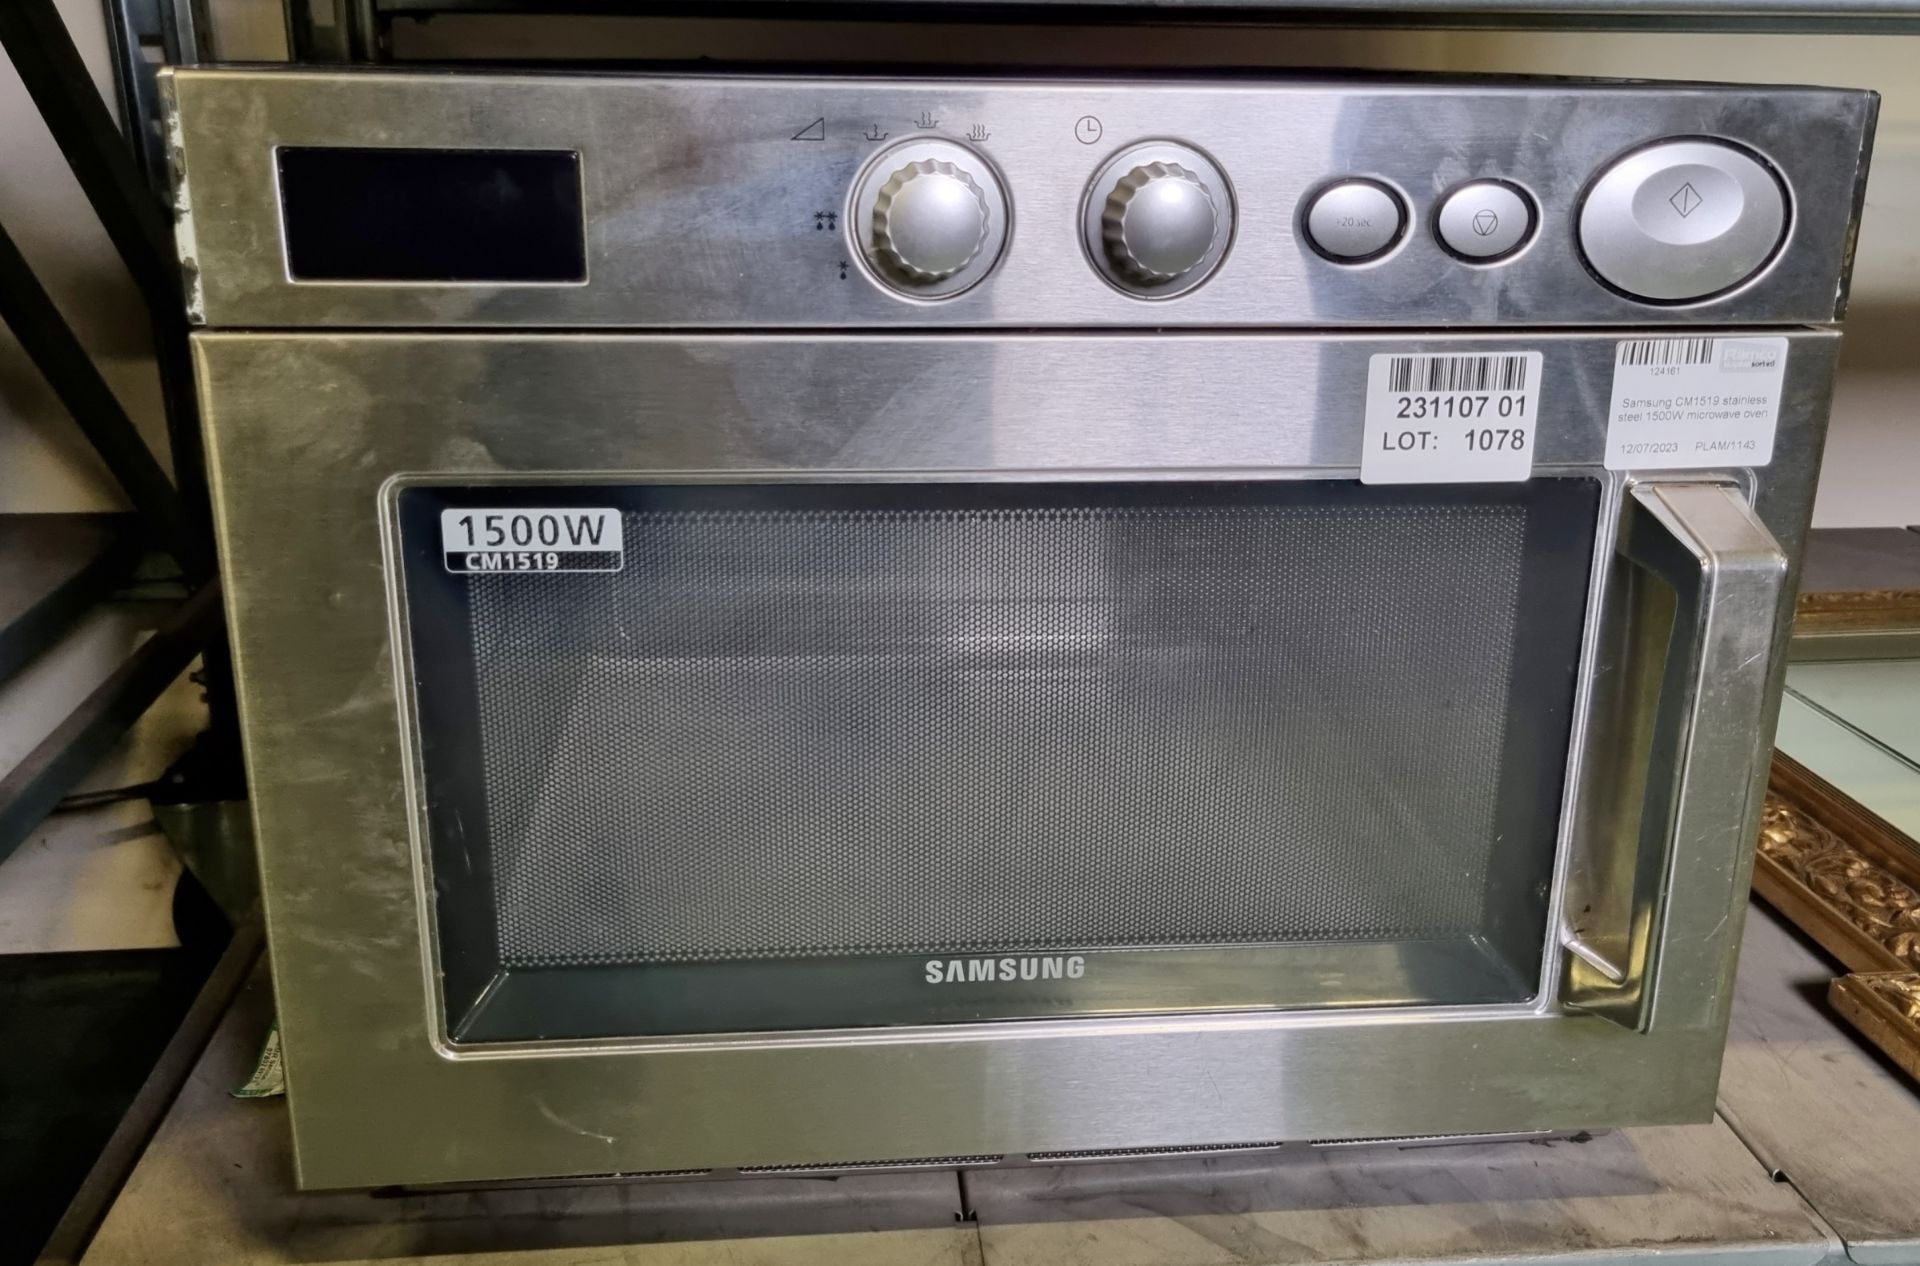 Samsung CM1519 stainless steel 1500W microwave oven